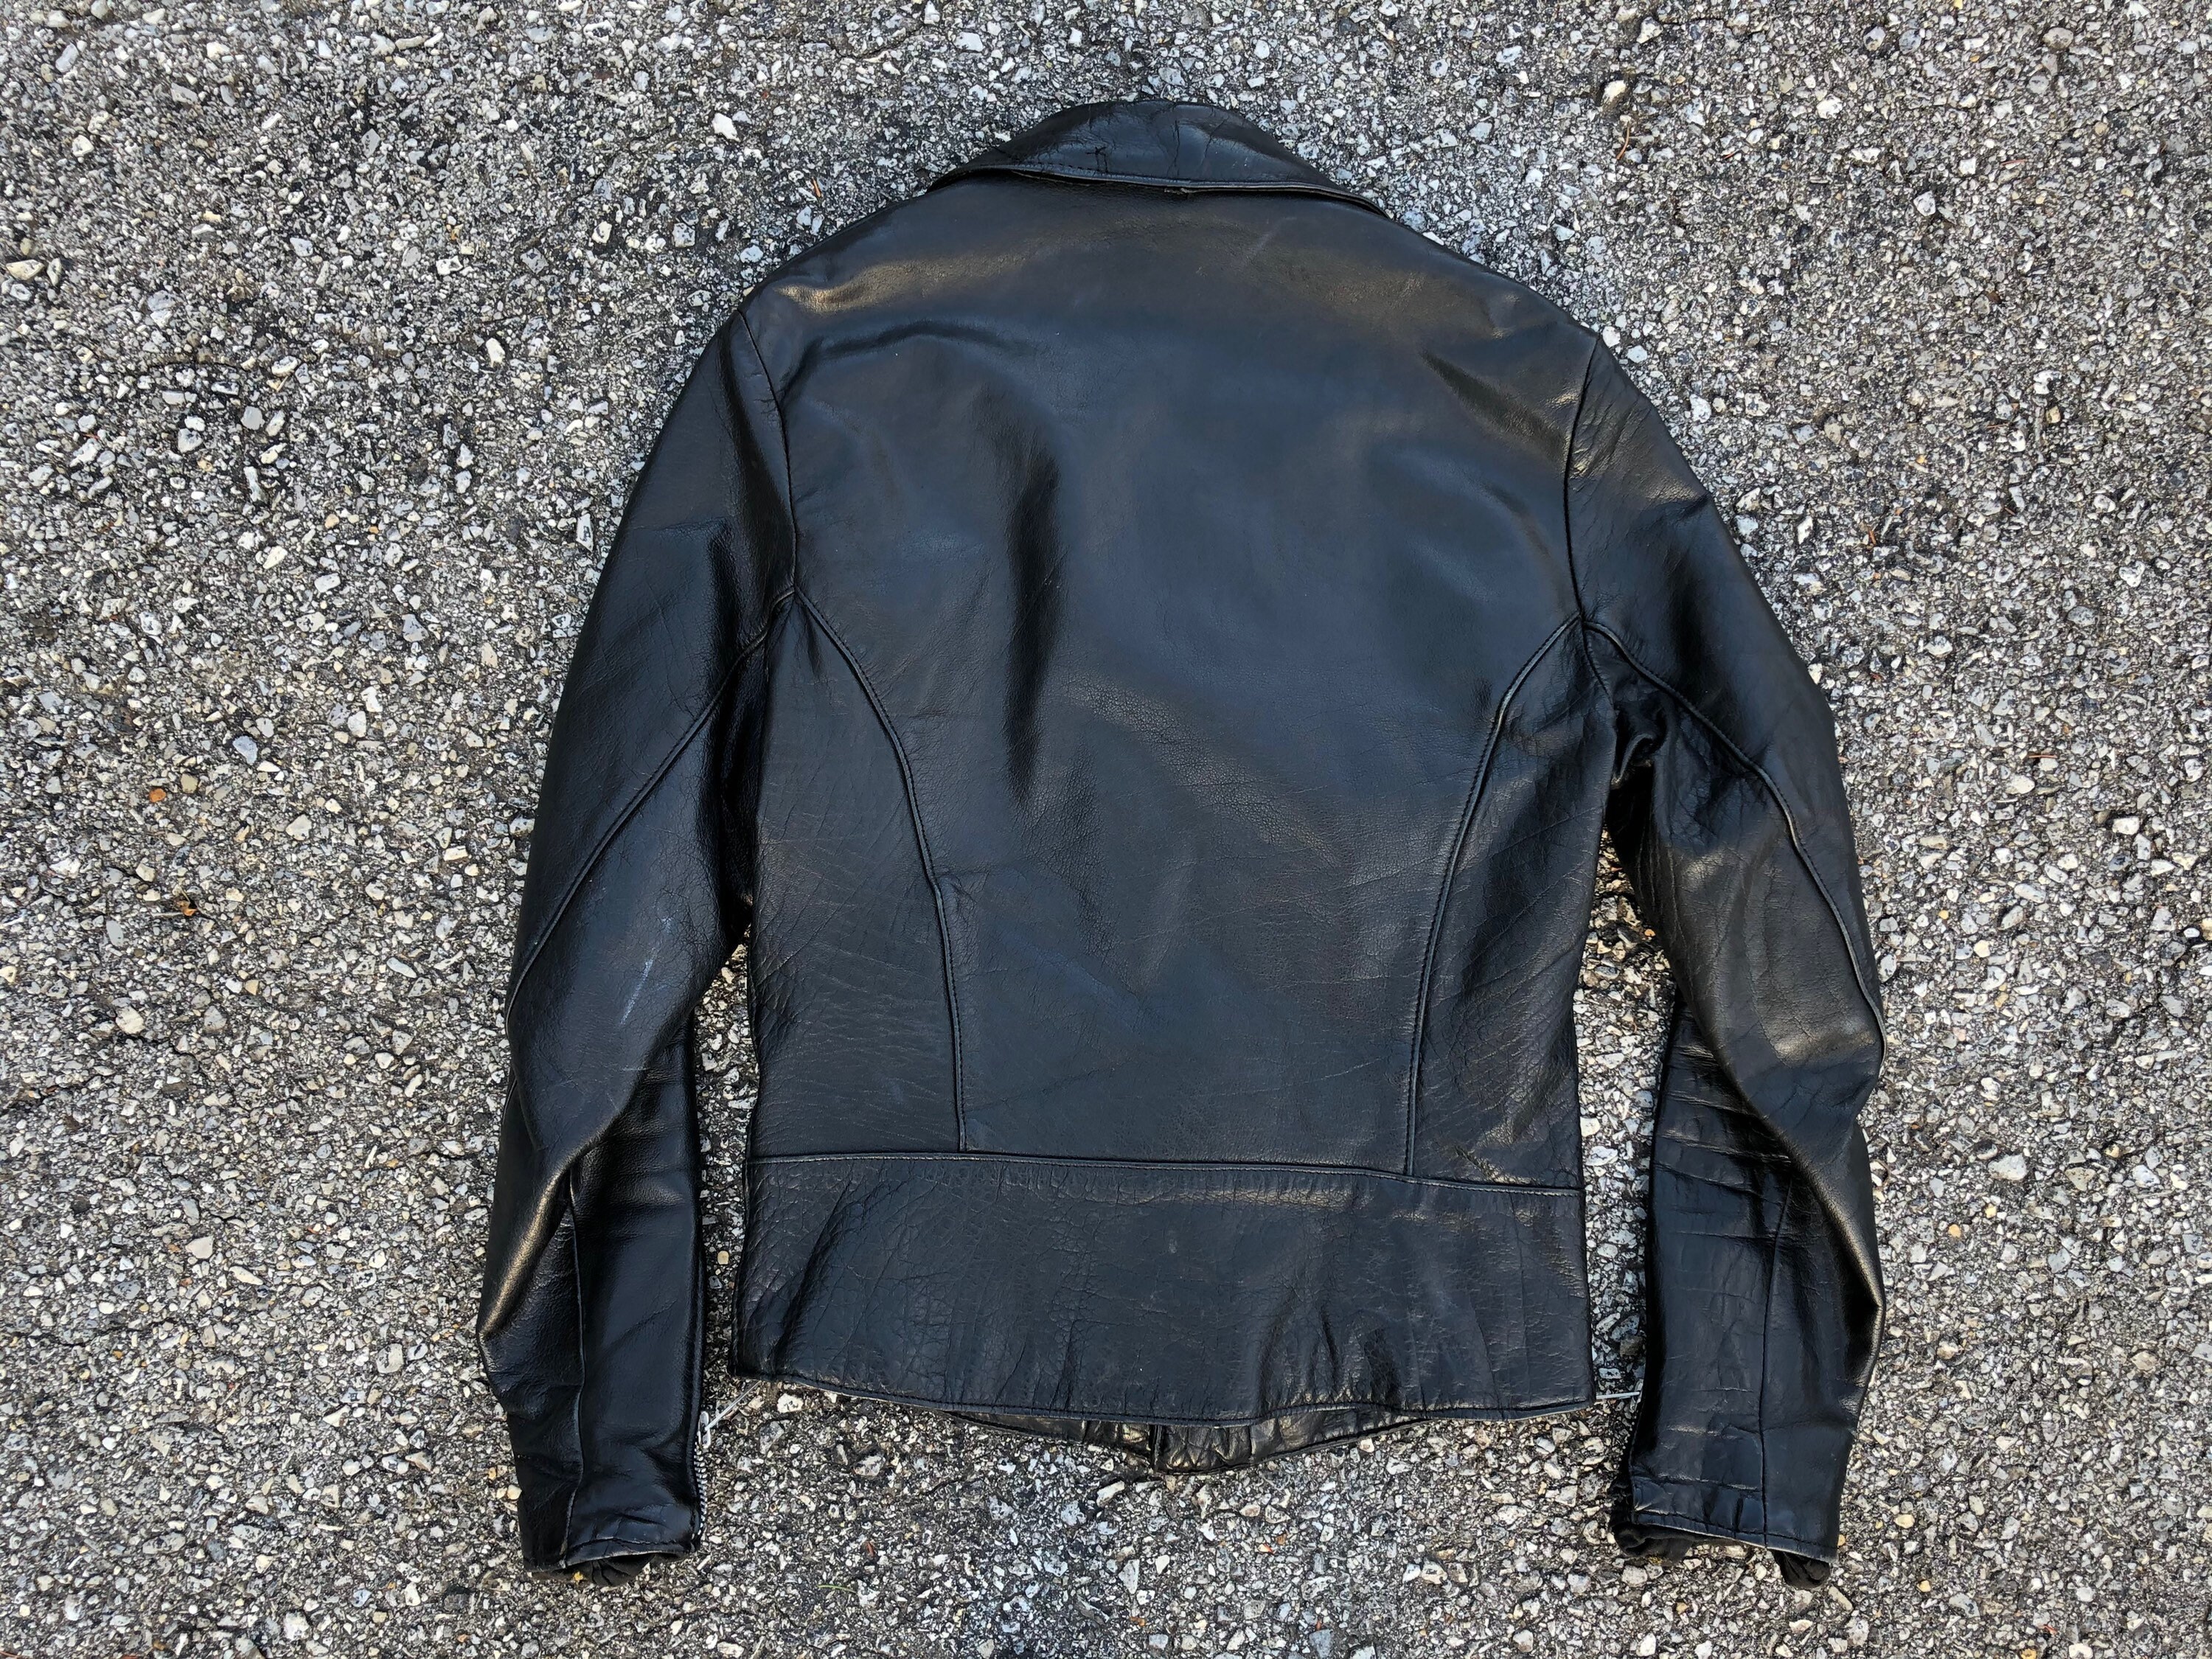 Made for Misfits: The Colorful History of the Black Leather Jacket